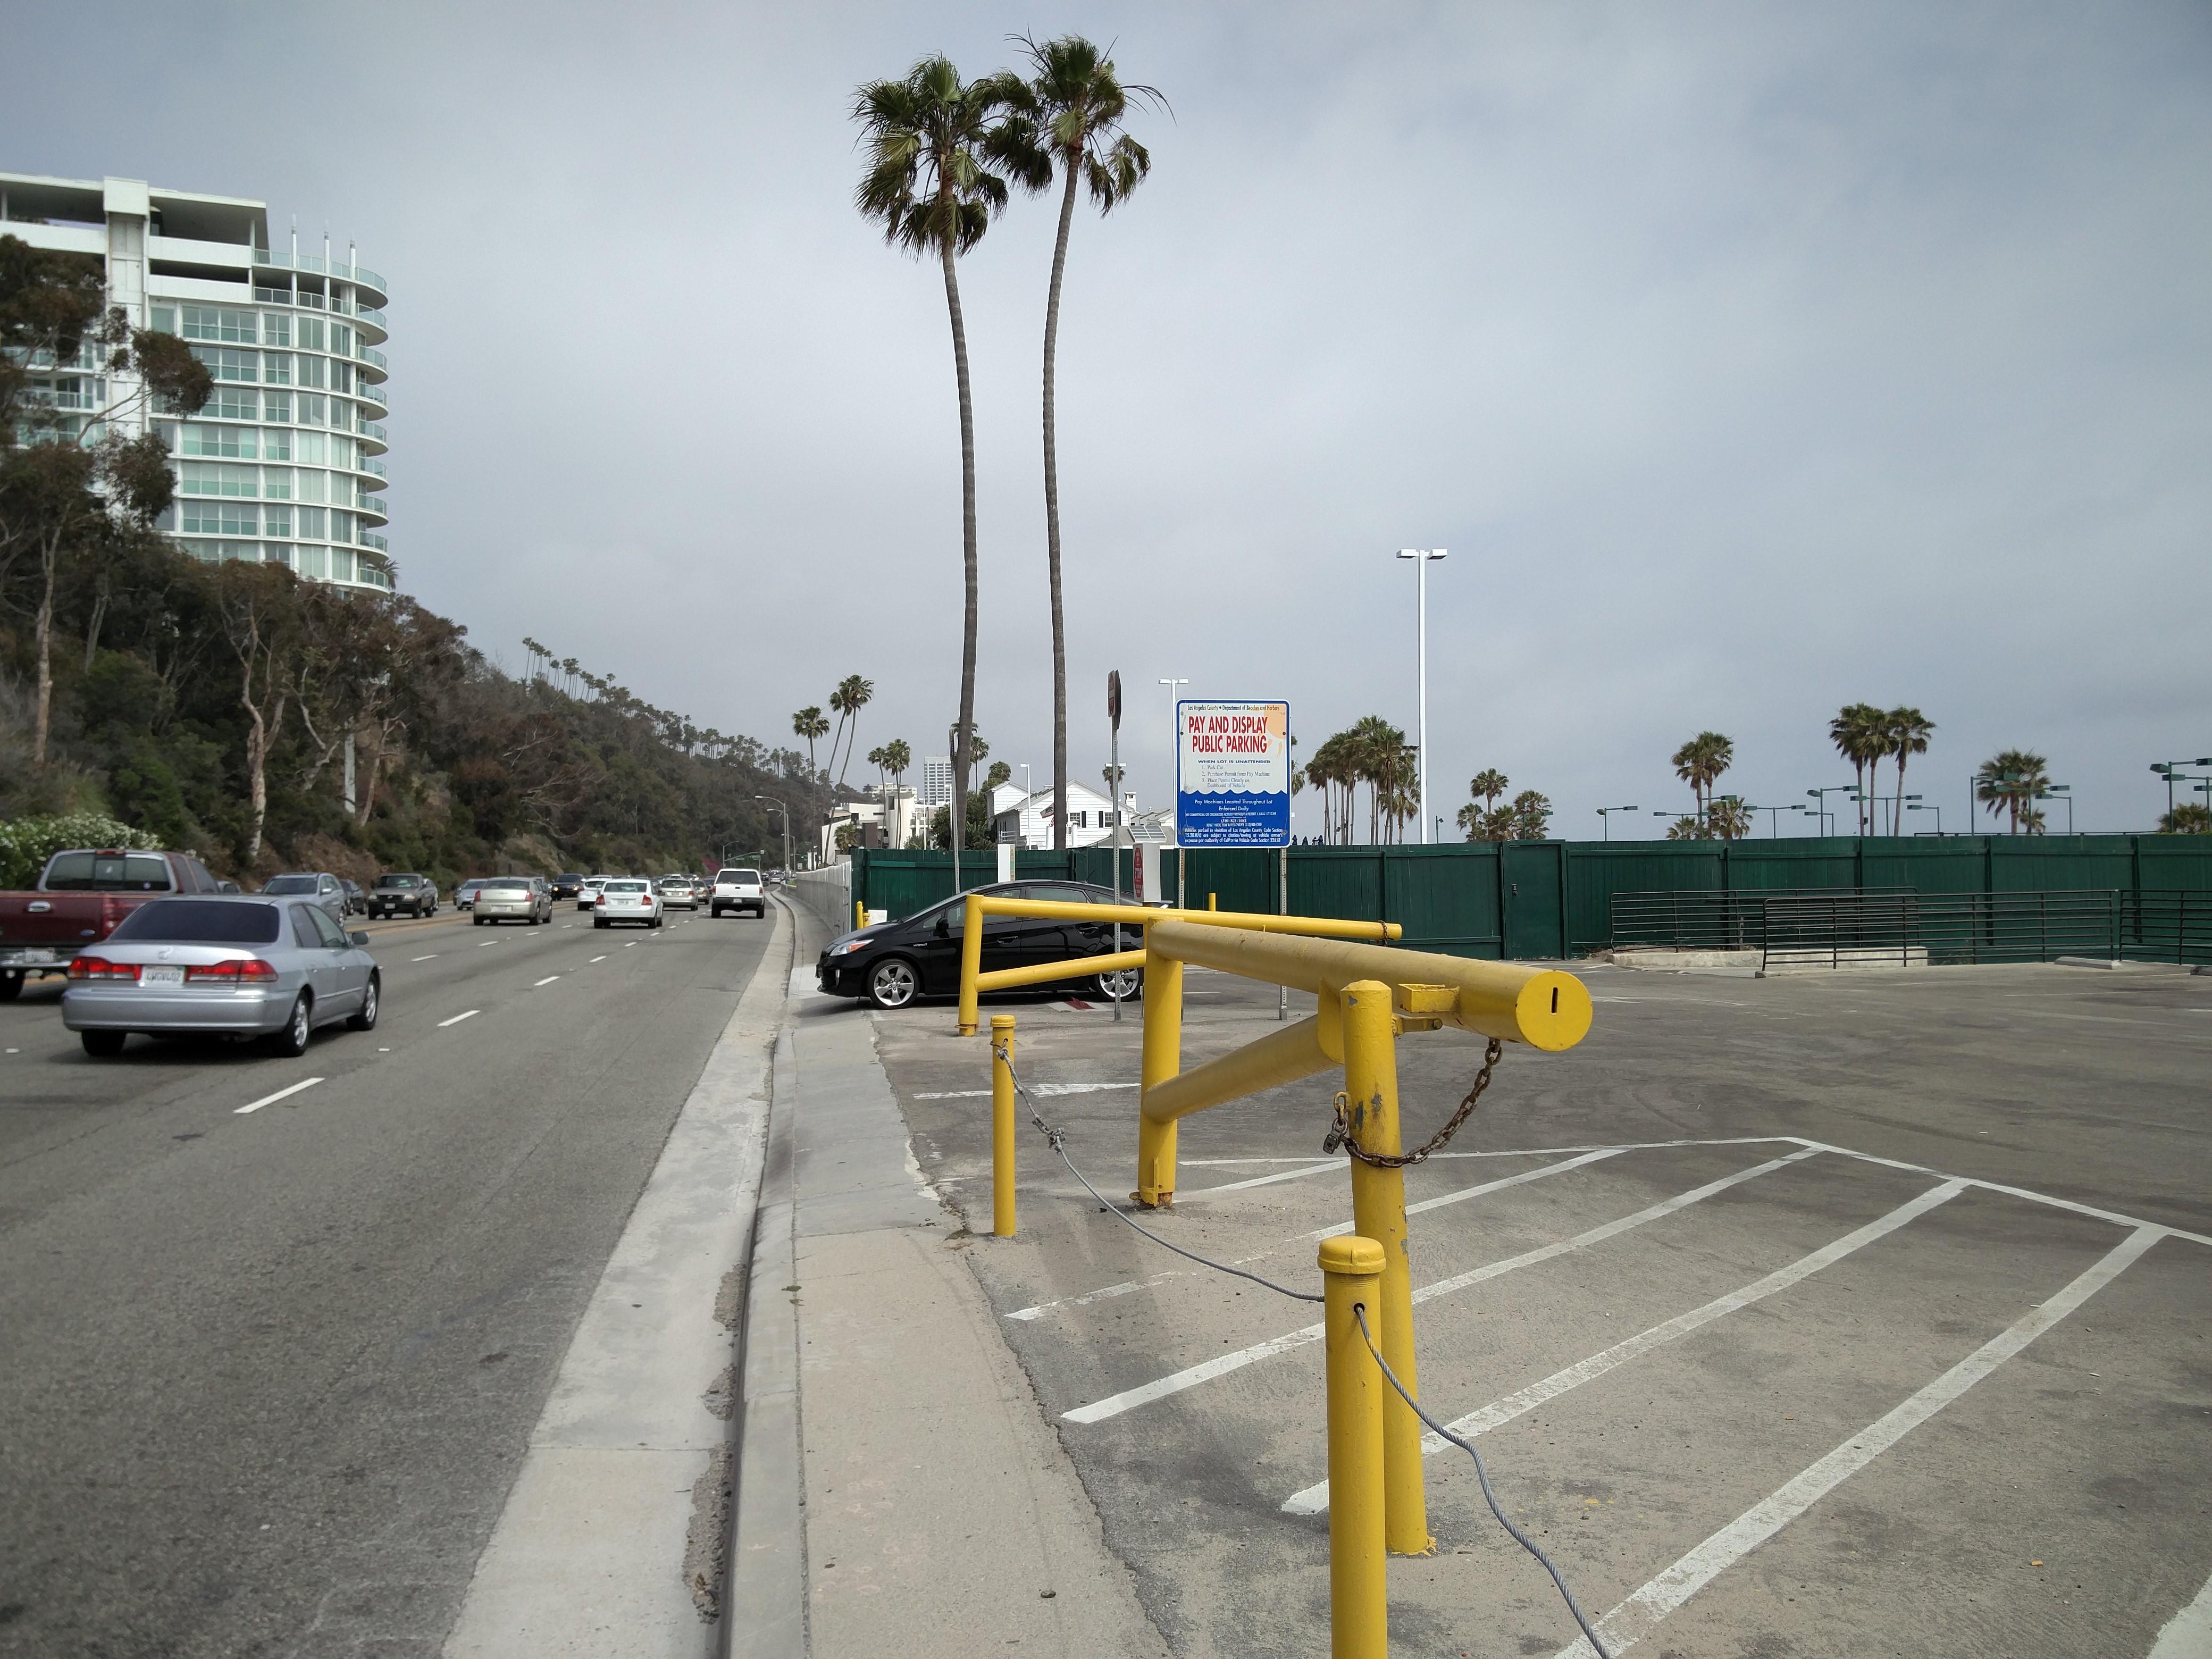 will rogers state beach - parking in santa monica | parkme